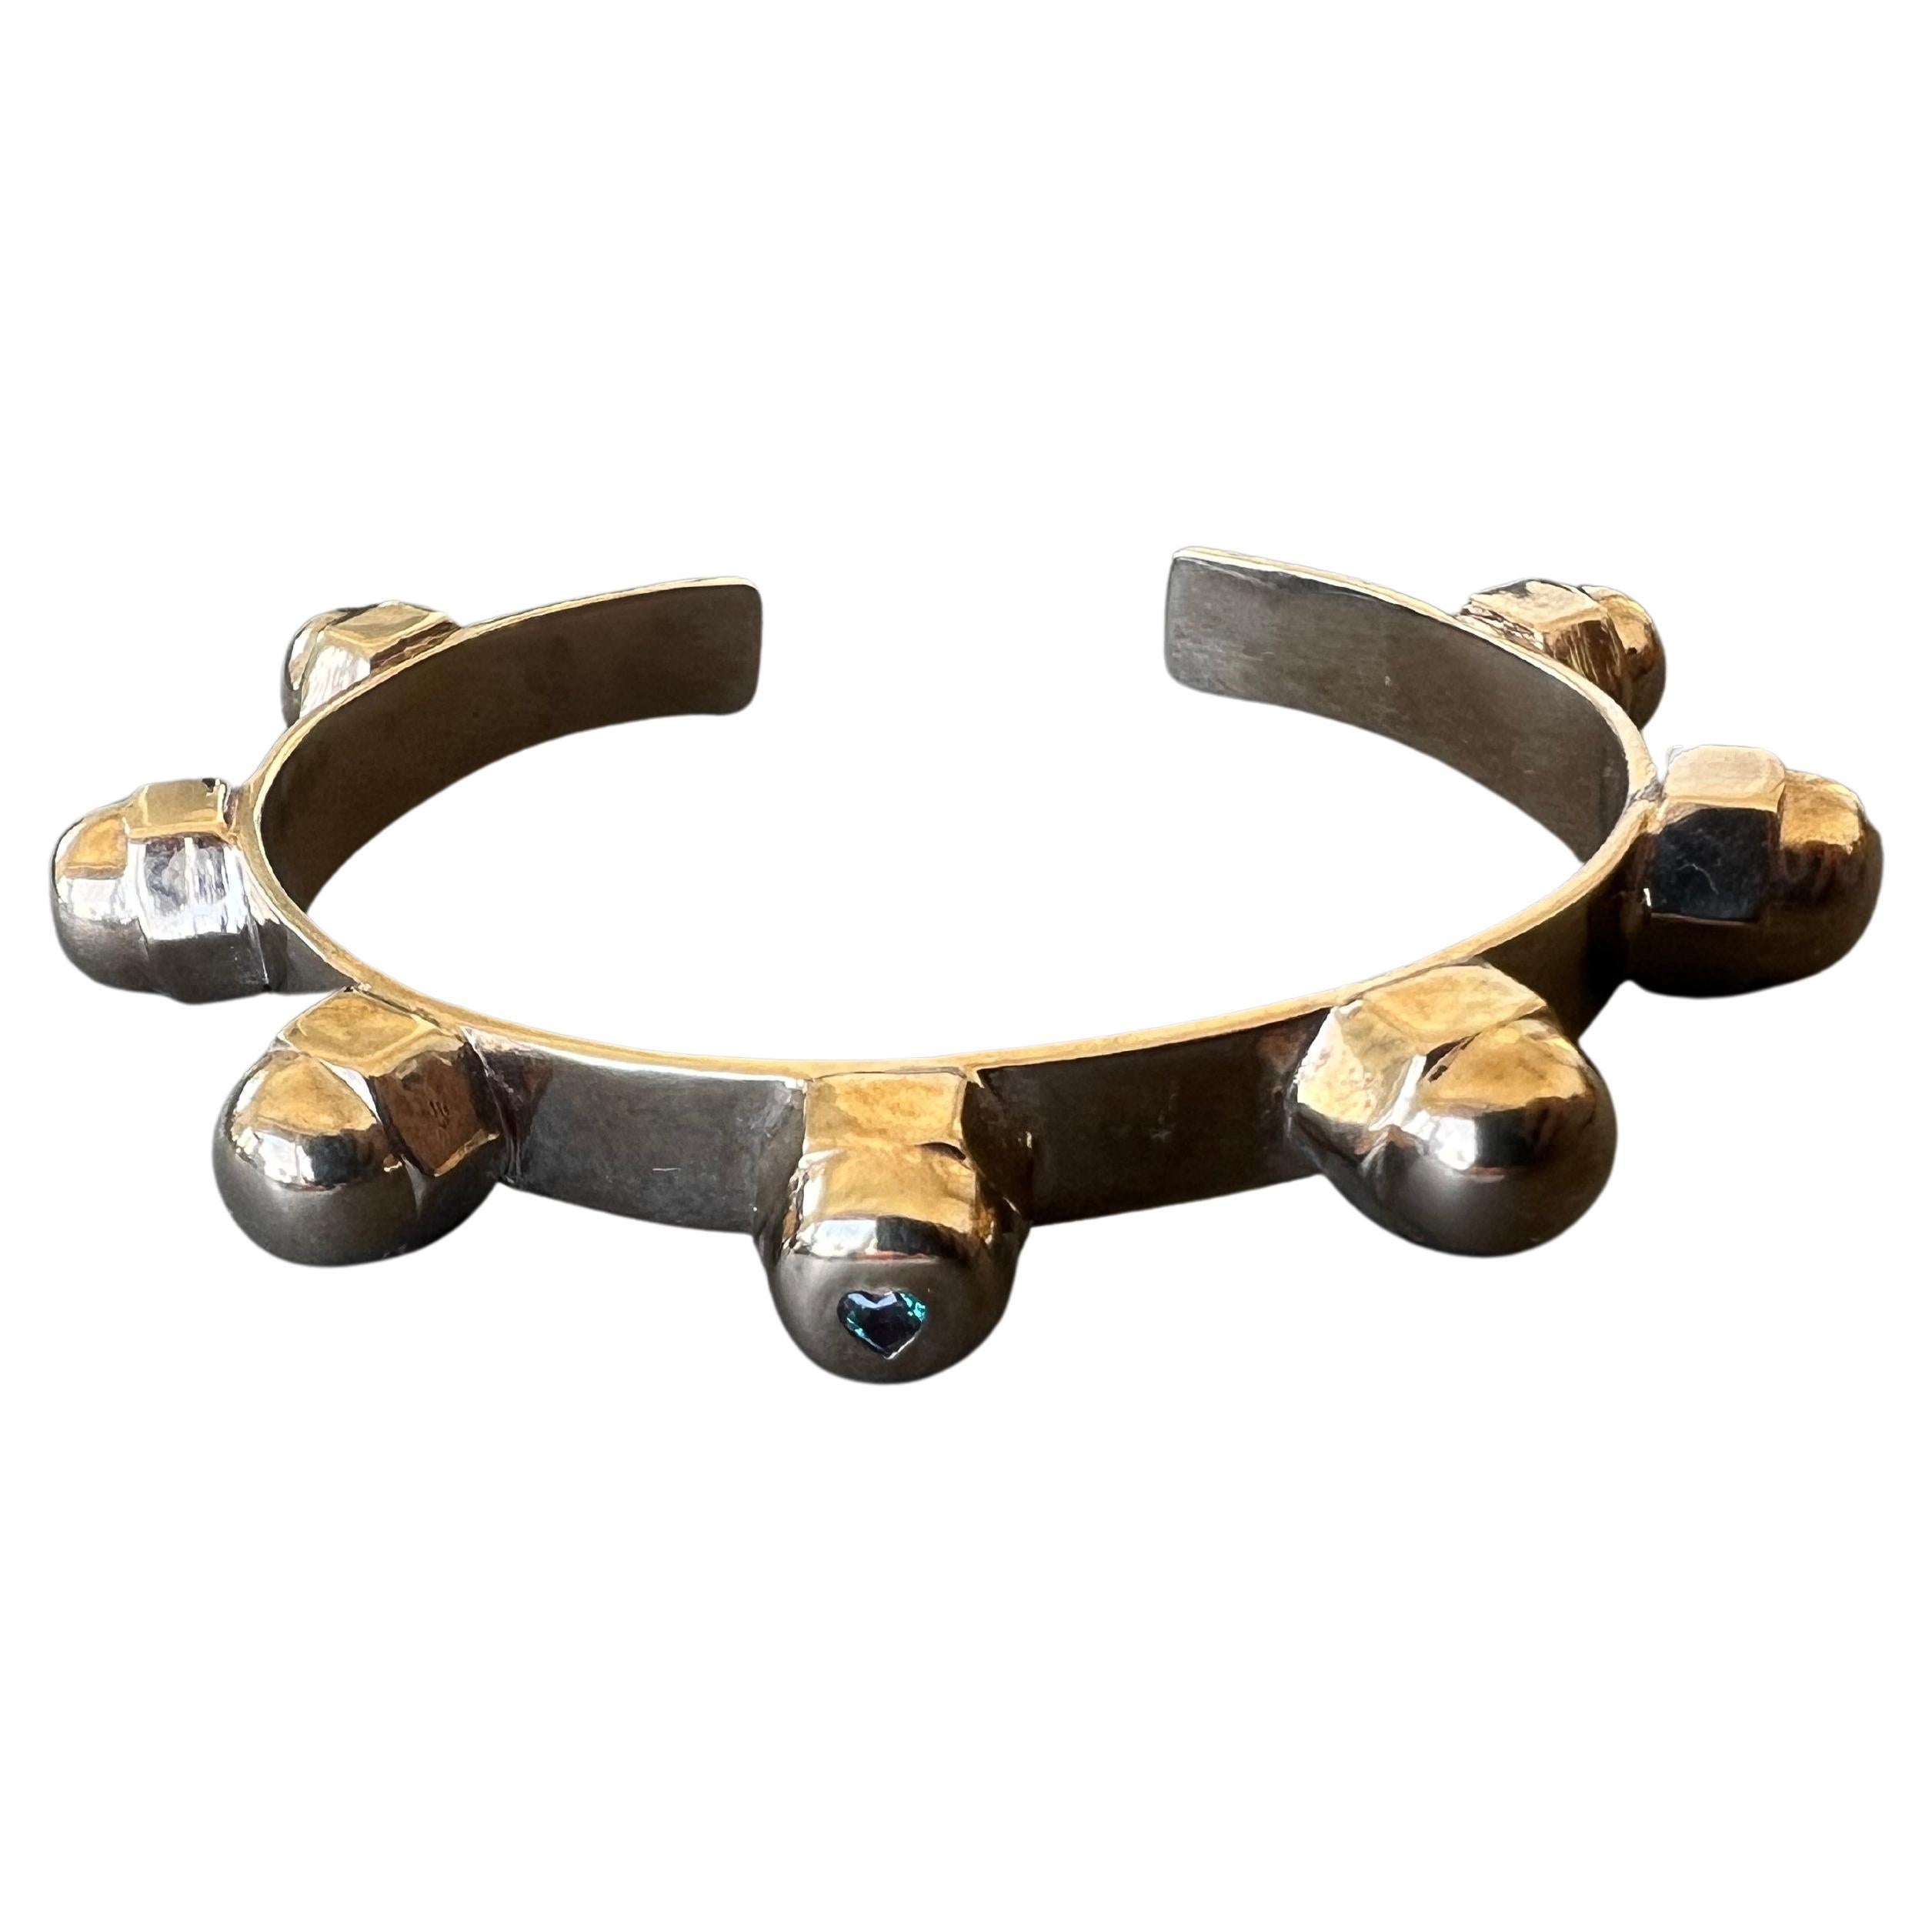 Alexandrite Heart Gem Cuff Bangle Bracelet 7 Studs J Dauphin

Material: Polished Bronze

Size Medium/ Large

Designer:

J DAUPHIN stud cuff bracelet

Hand Made in Los Angeles

Available for immediate delivery
